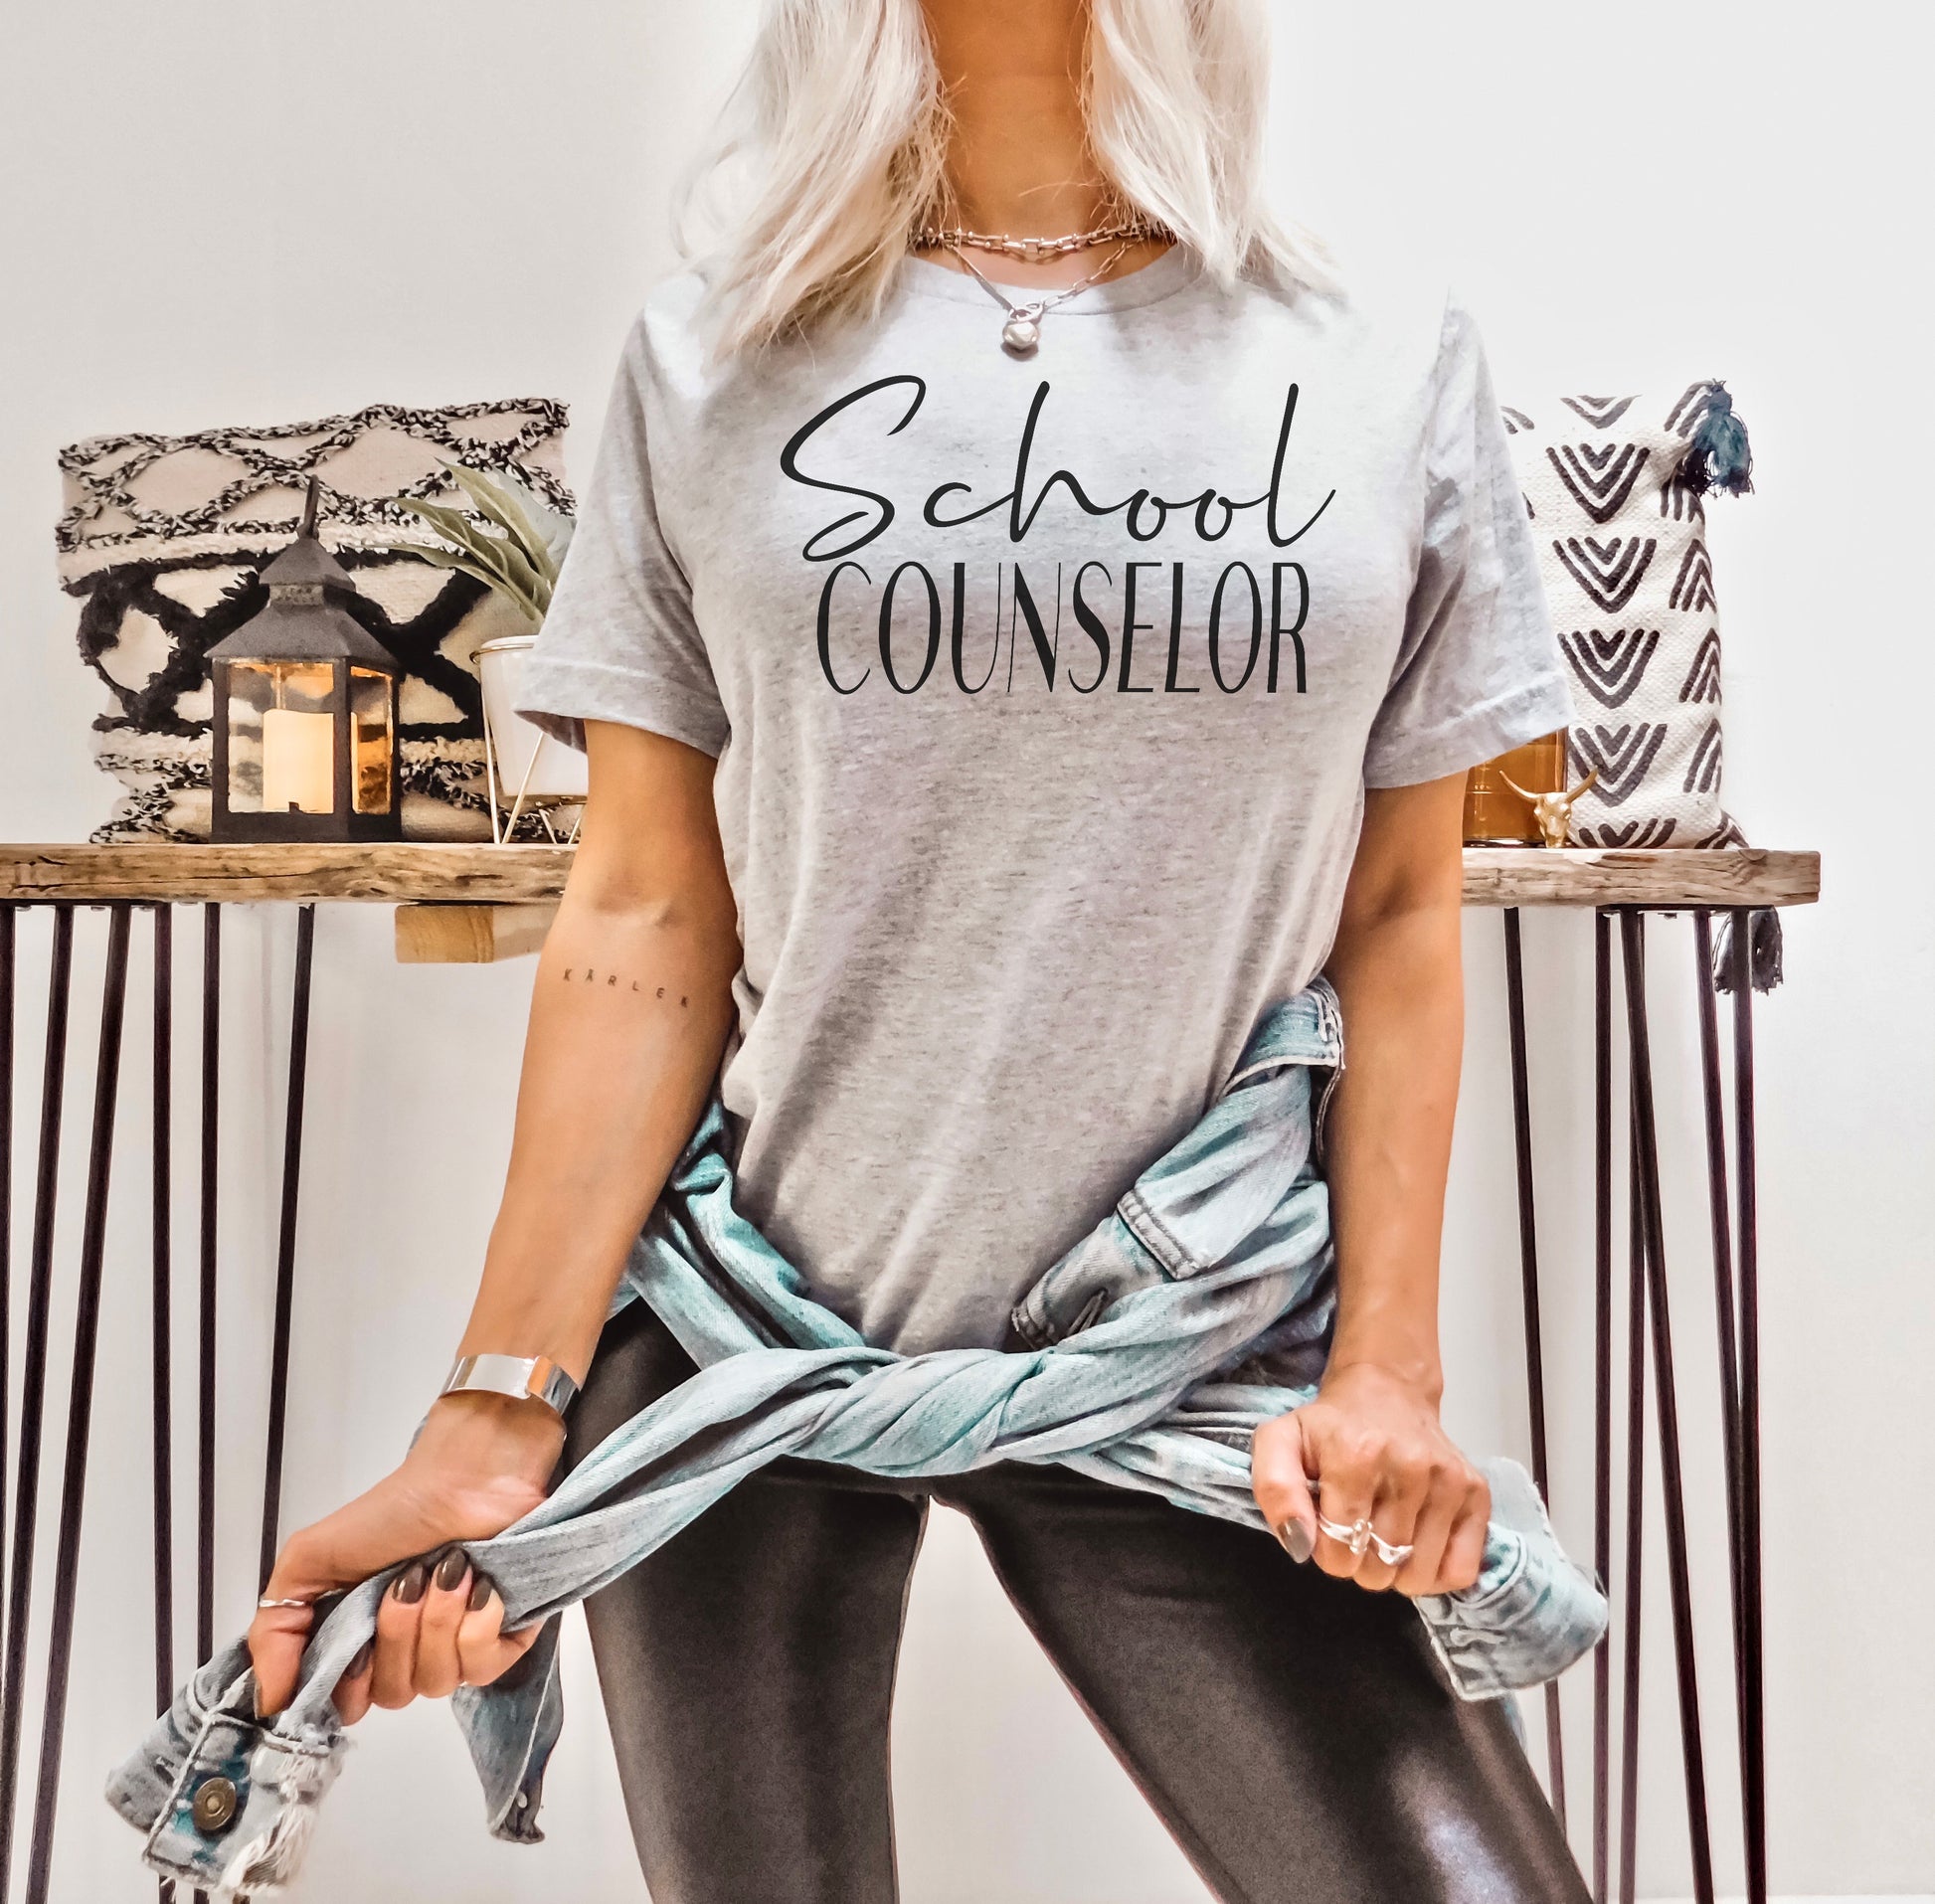 Designs by Prim School Counselor Soft Unisex T-Shirt | Therapist Coach Fitness Instructor Mental Health Guidance Training Positive Vibes Educator Top